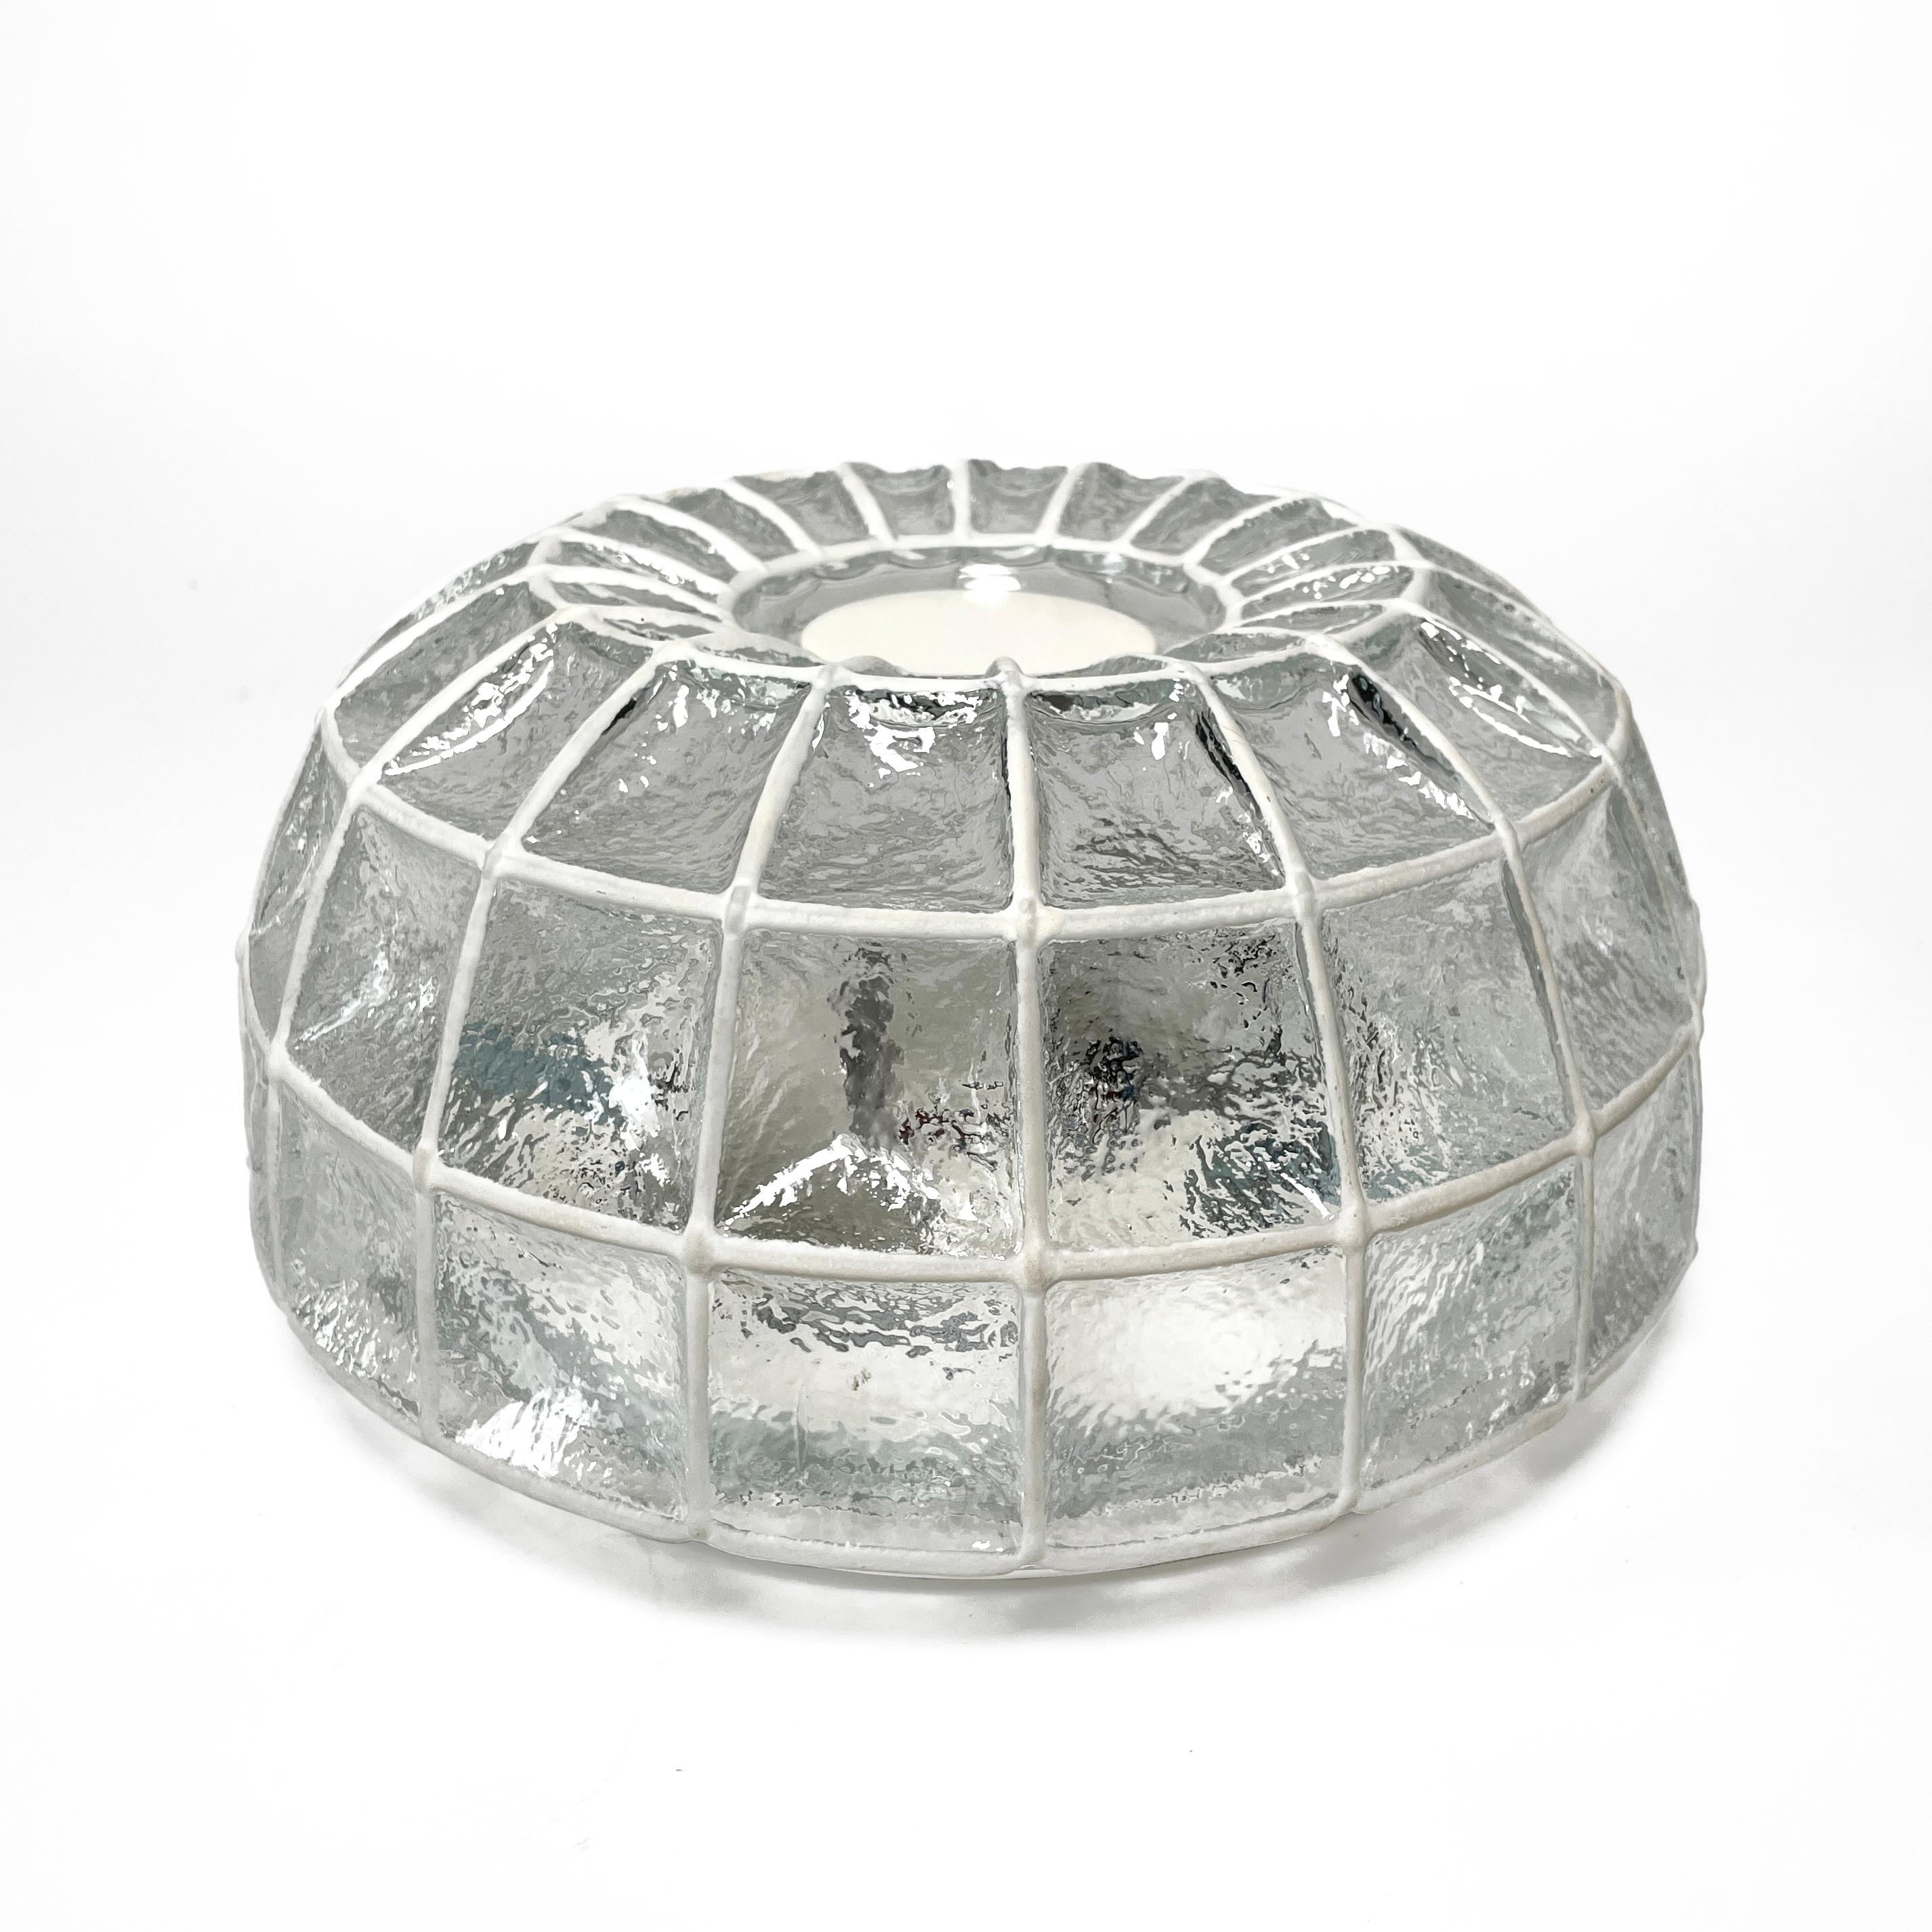 Elegant vintage ceiling or wall light made of iron and clear glass, manufactured by Glashütte Limburg in the 1960s. The lamp has a heavy spider web shaped lampshade made of iron and textured glass and a metal fixture. The lamp impresses with its